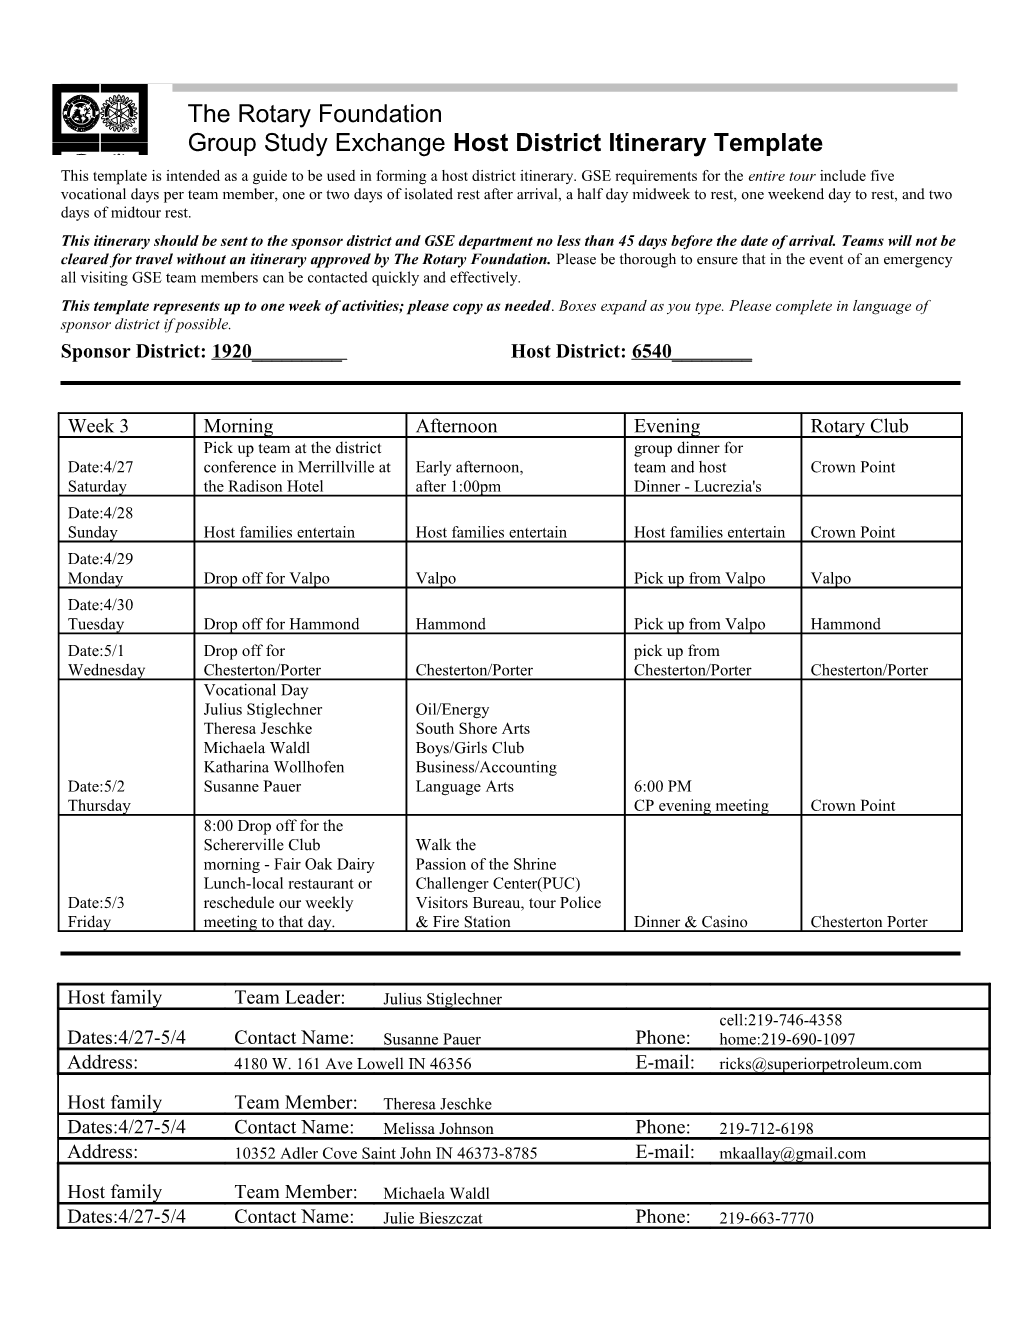 Group Study Exchange (GSE) Host District Itinerary Template s1